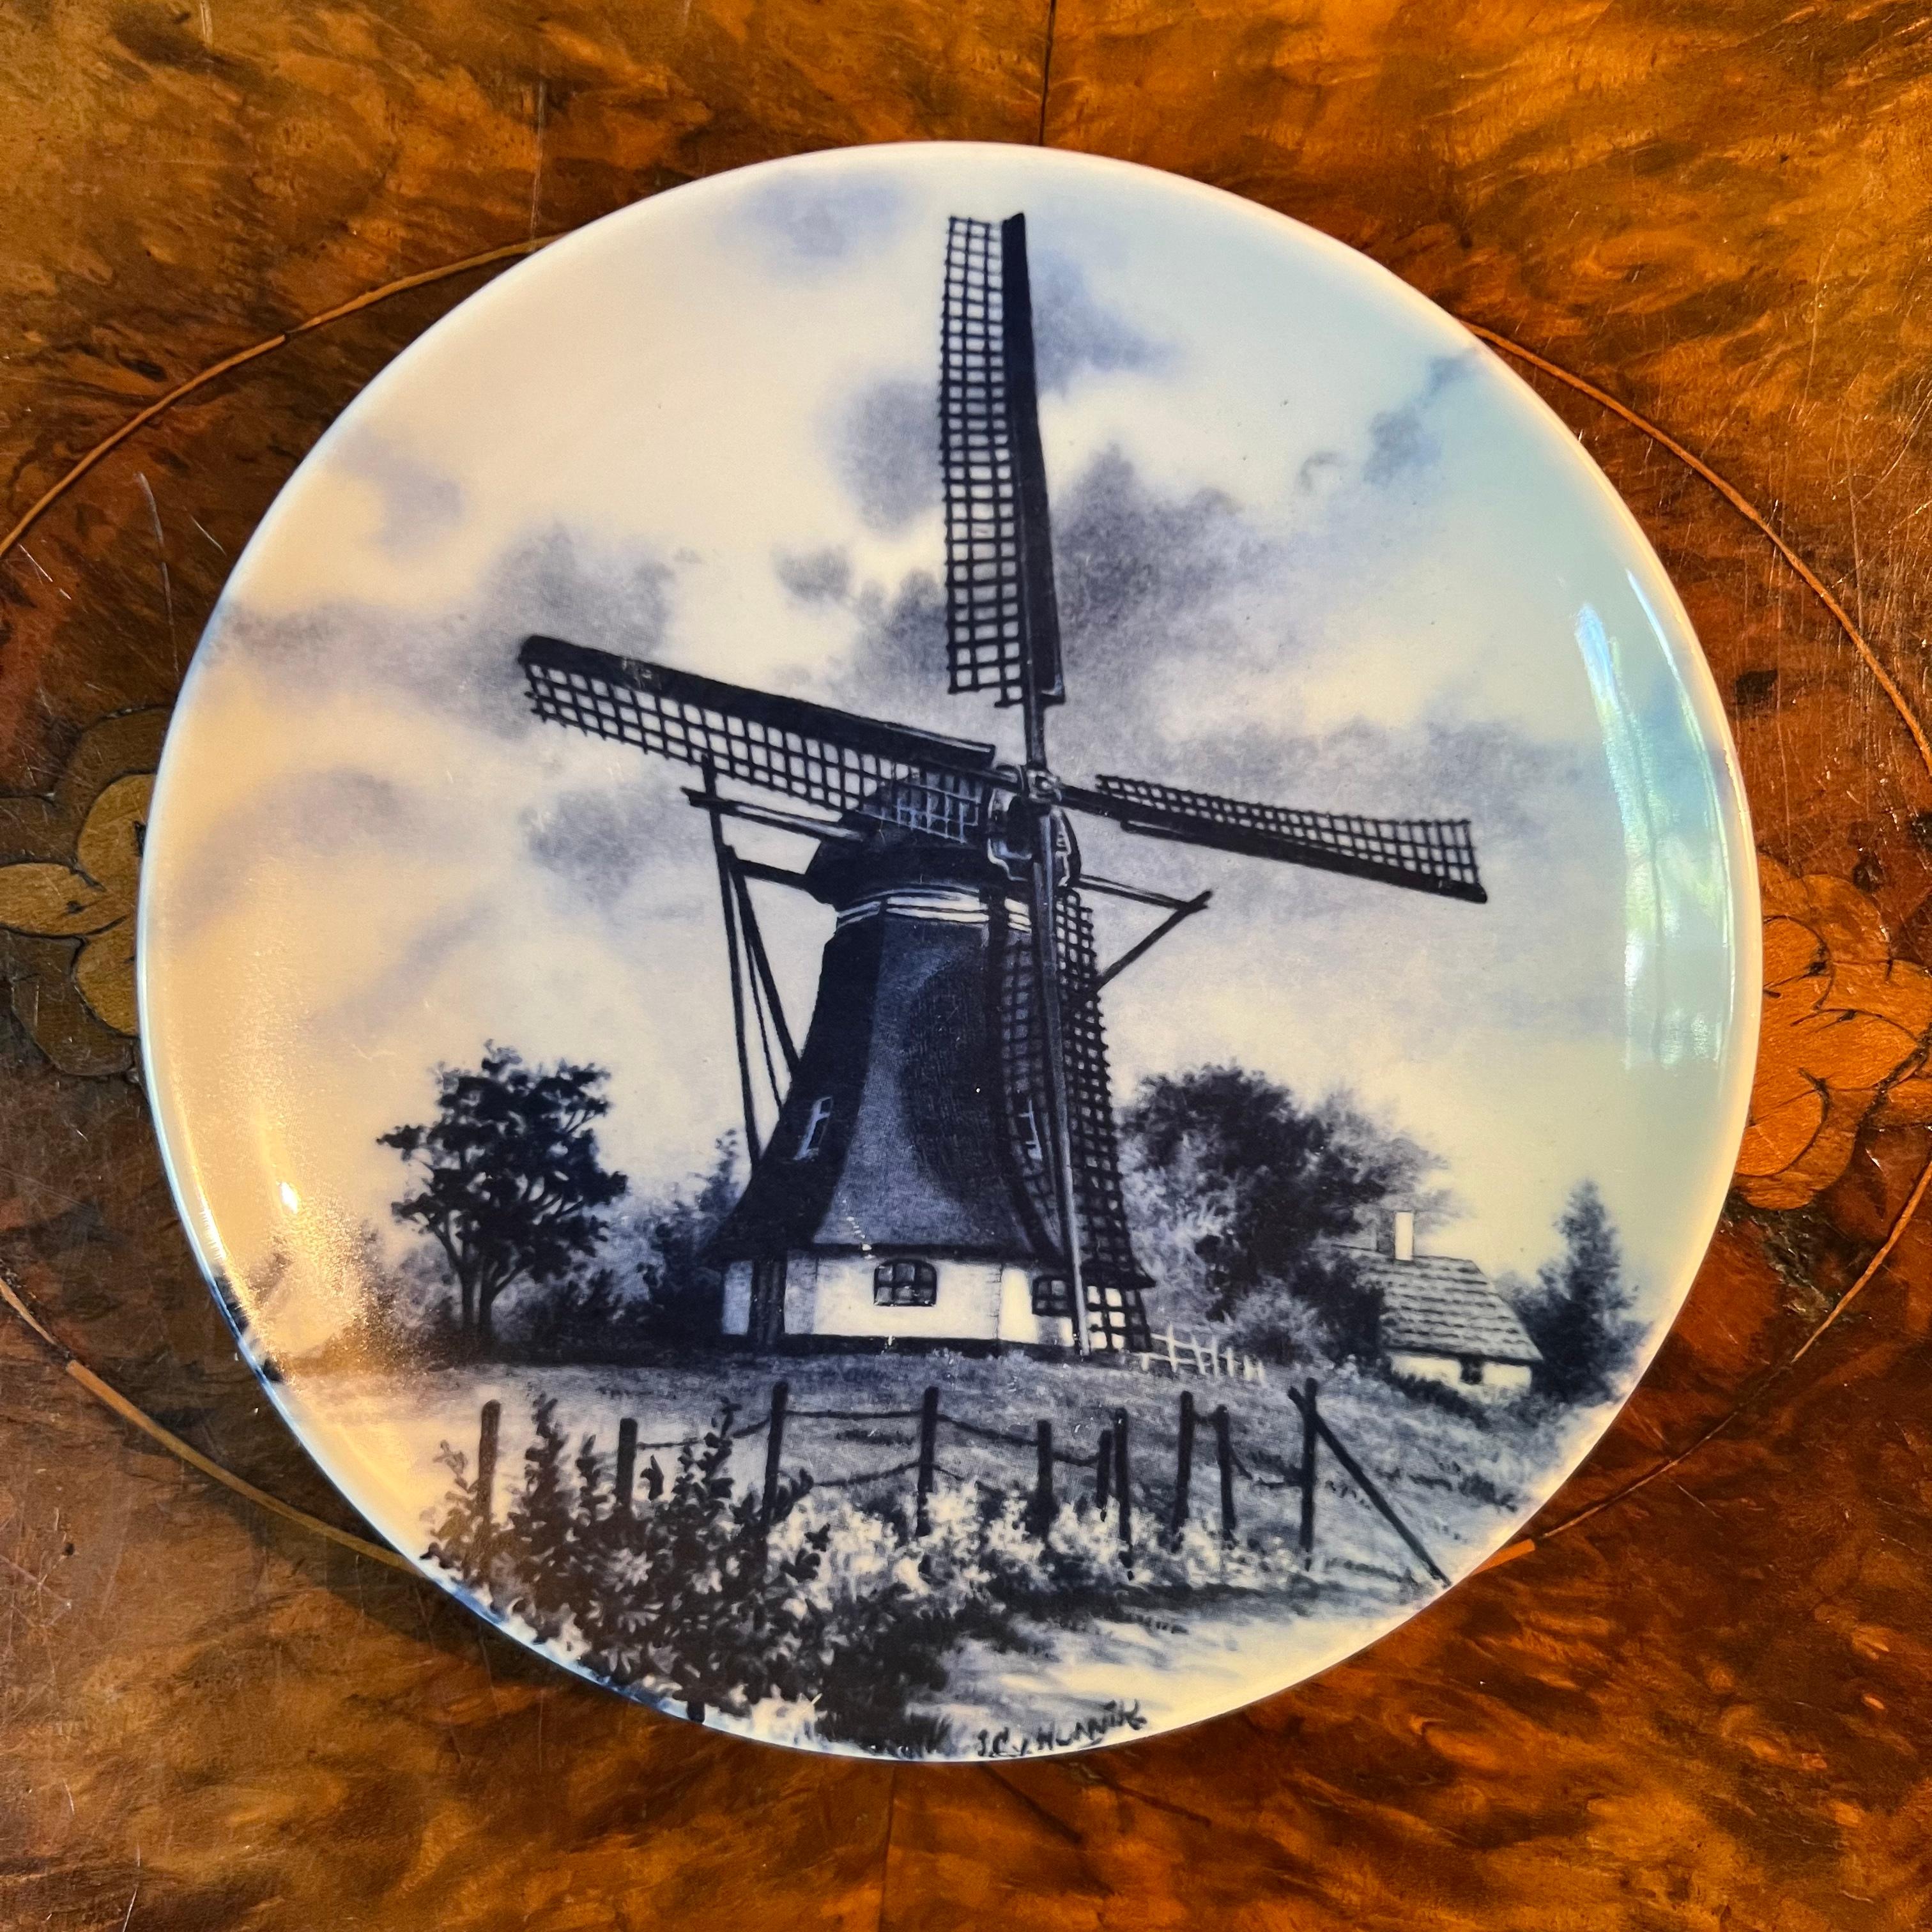 Blue print of windmill, some scratches to print, stamped Delft Blue

Circa: 1984

Material: Porcelain 

Country Of Origin: Holland 

Measurements: 1.5cm high, 12.5cm diameter 

Postage via Australia Post with tracking available